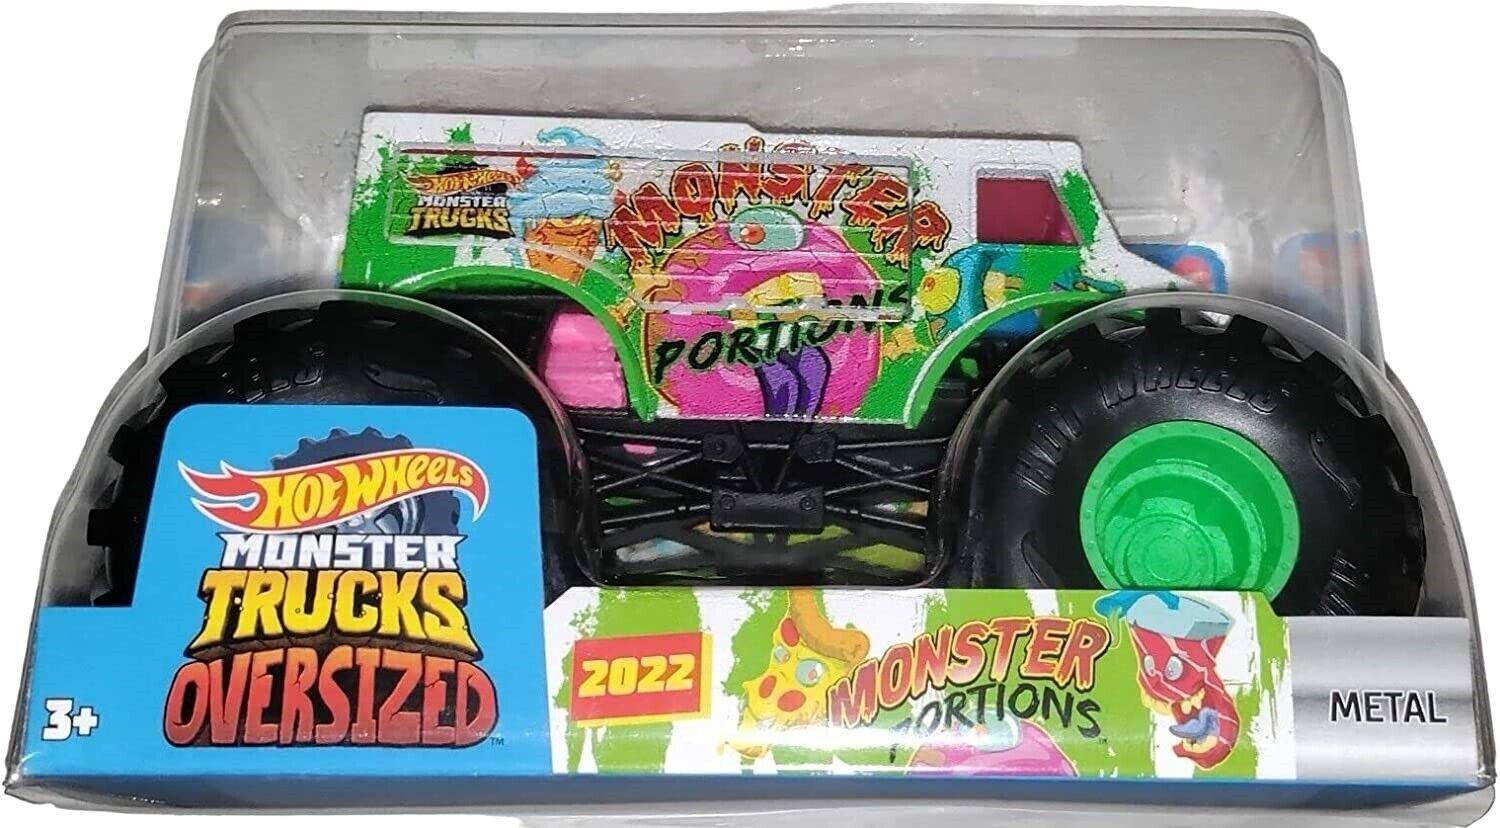 Hot Wheels Metal Monster monster portions 1:24 Scale Diecast Car 3+ Toy Race